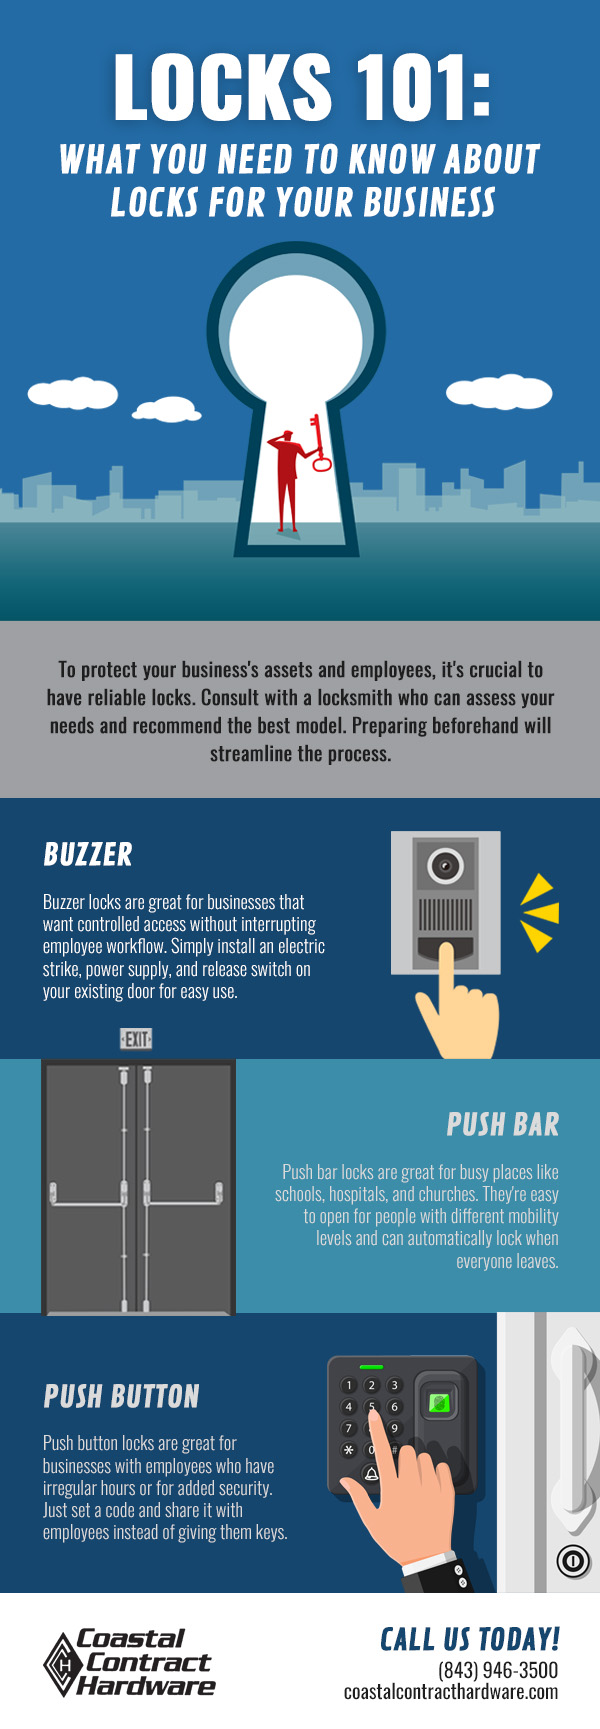 Locks 101: What You Need To Know About Locks For Your Business